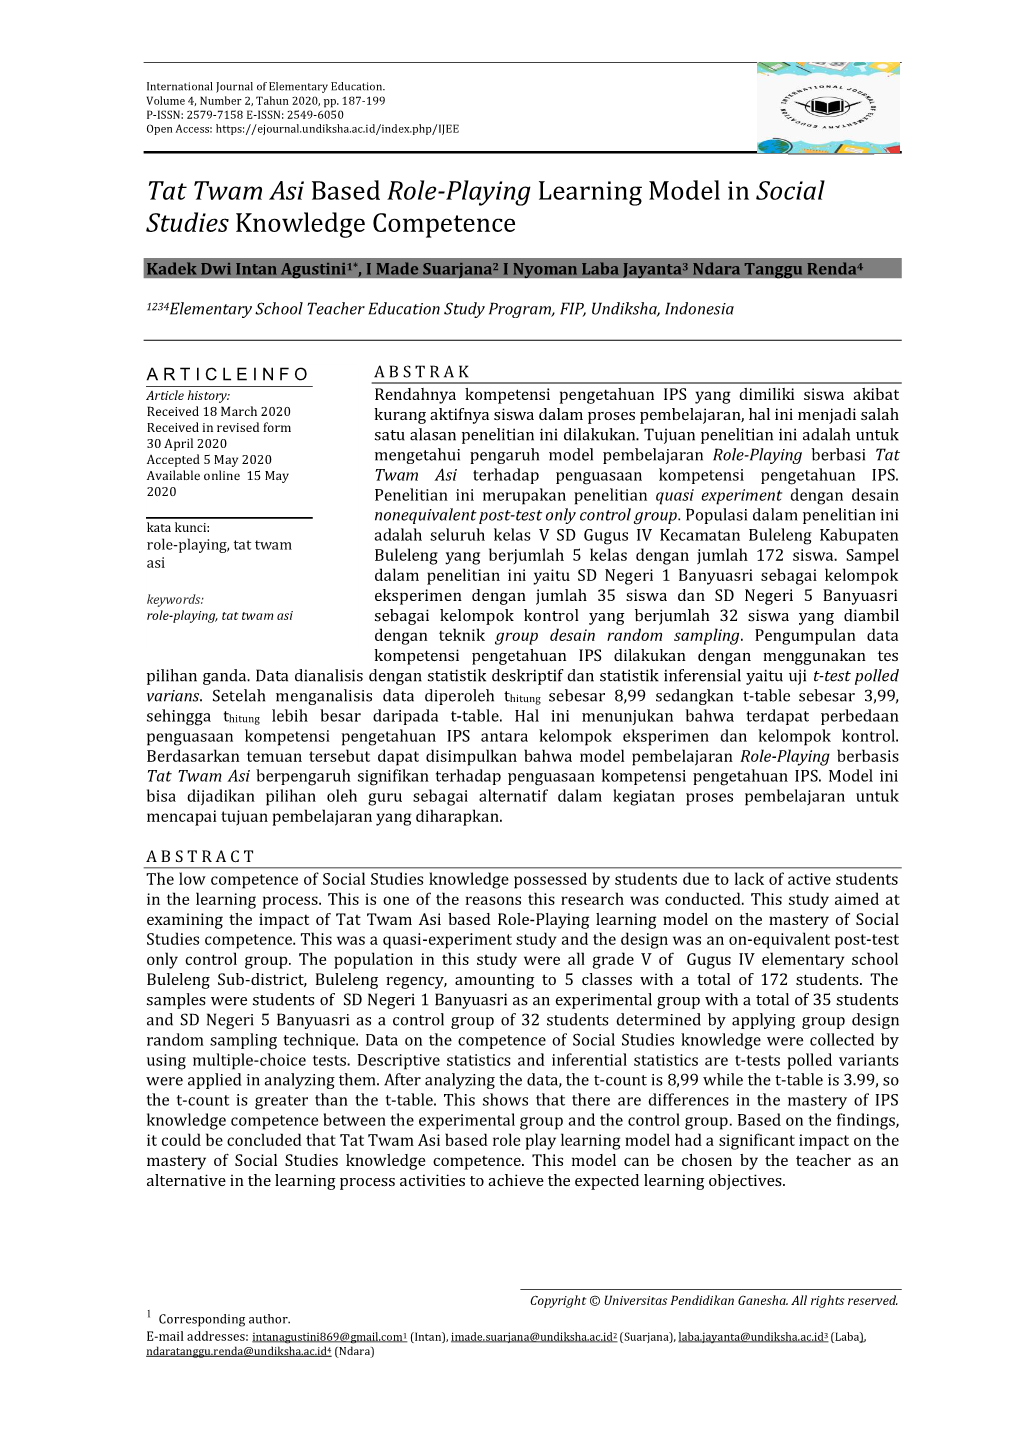 Tat Twam Asi Based Role-Playing Learning Model in Social Studies Knowledge Competence